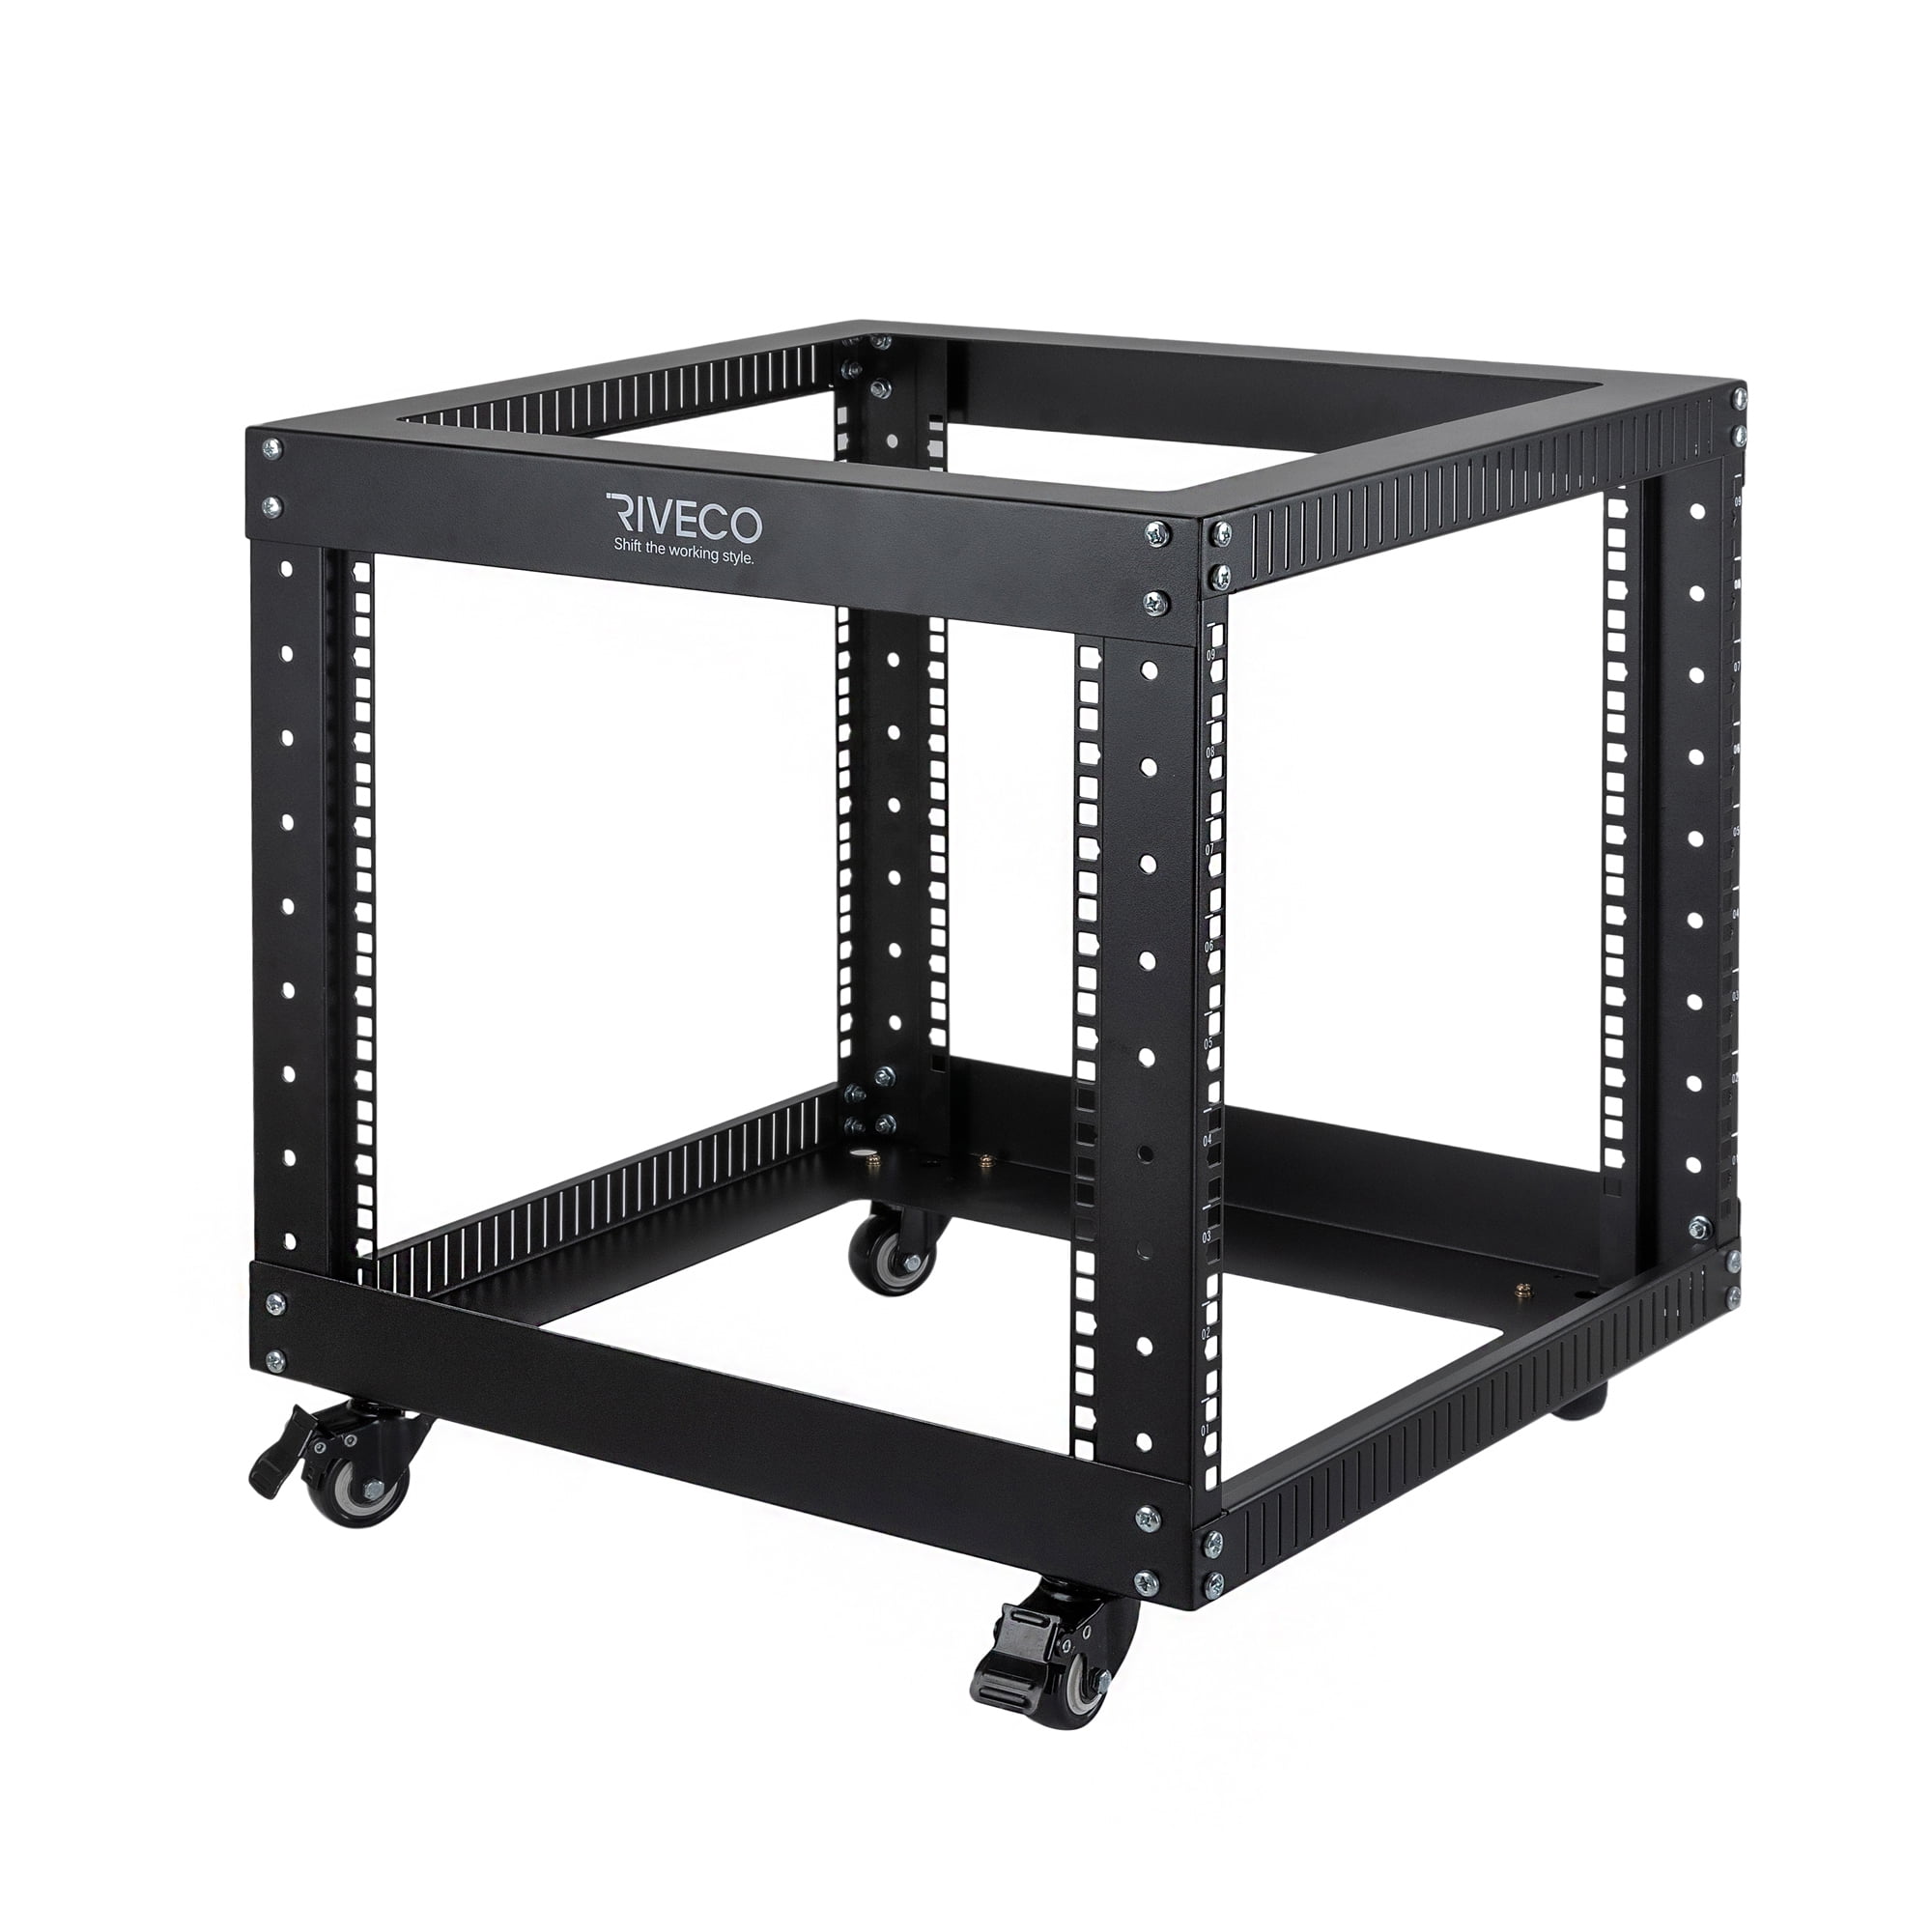 RIVECO 9U Open Frame Server Rack with Casters- Heavy Duty 4 Post Quick ...